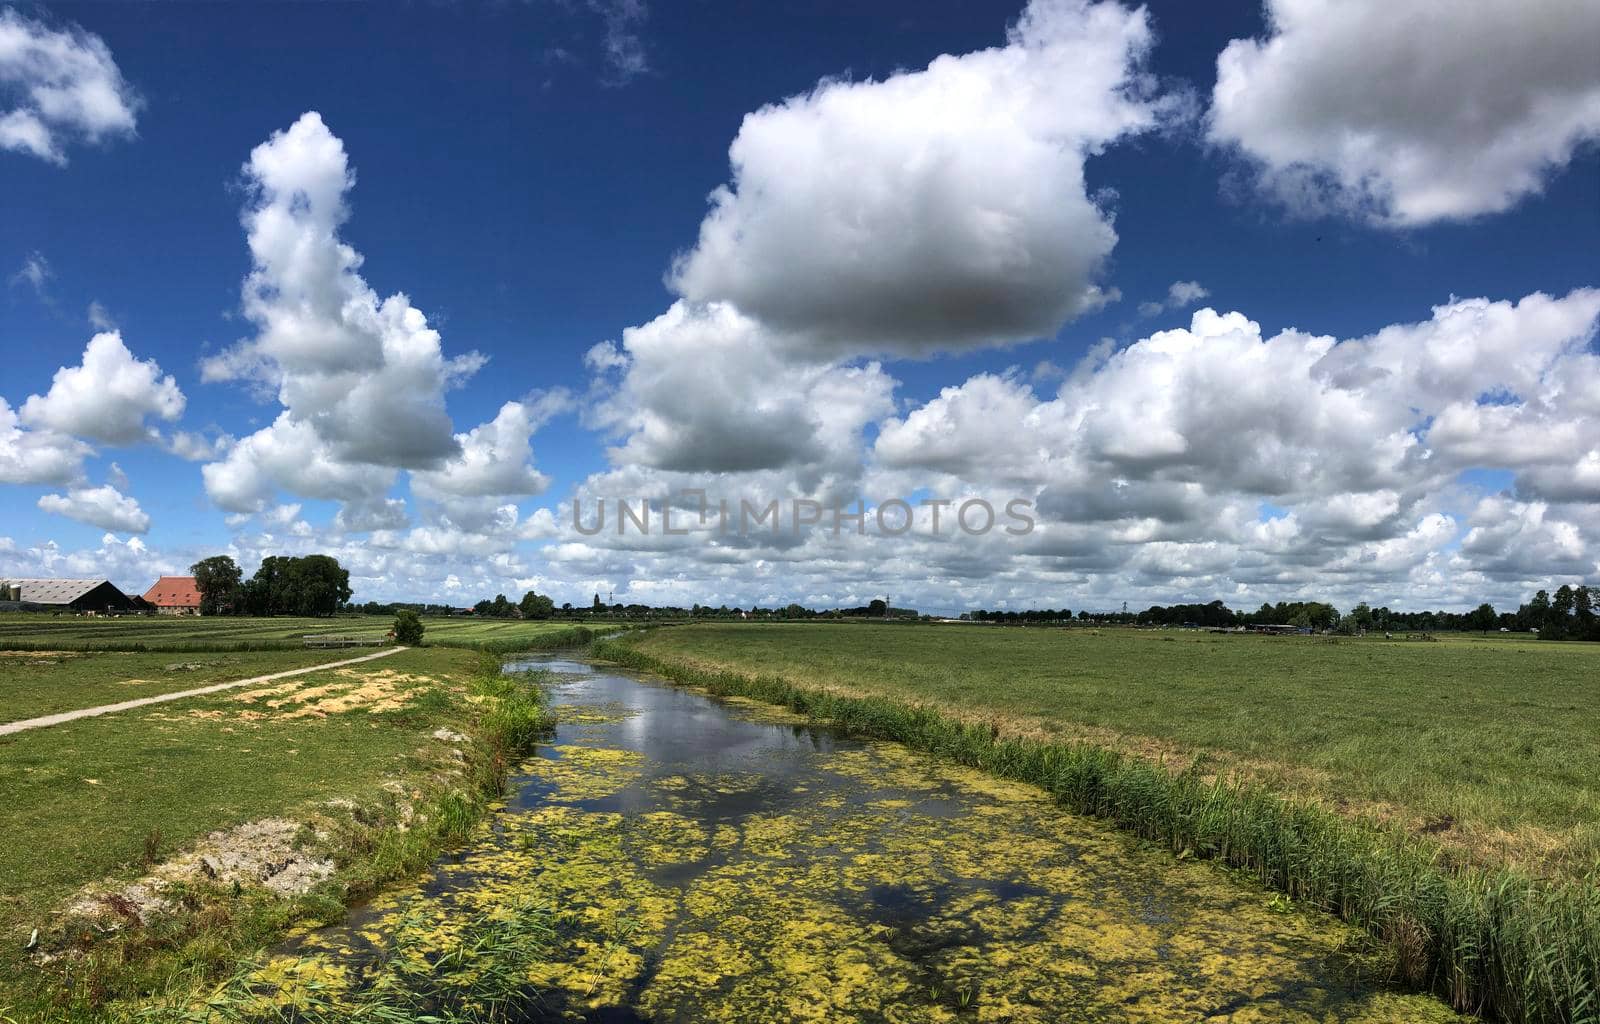 Canal and farmland around Boksum in Friesland The Netherlands